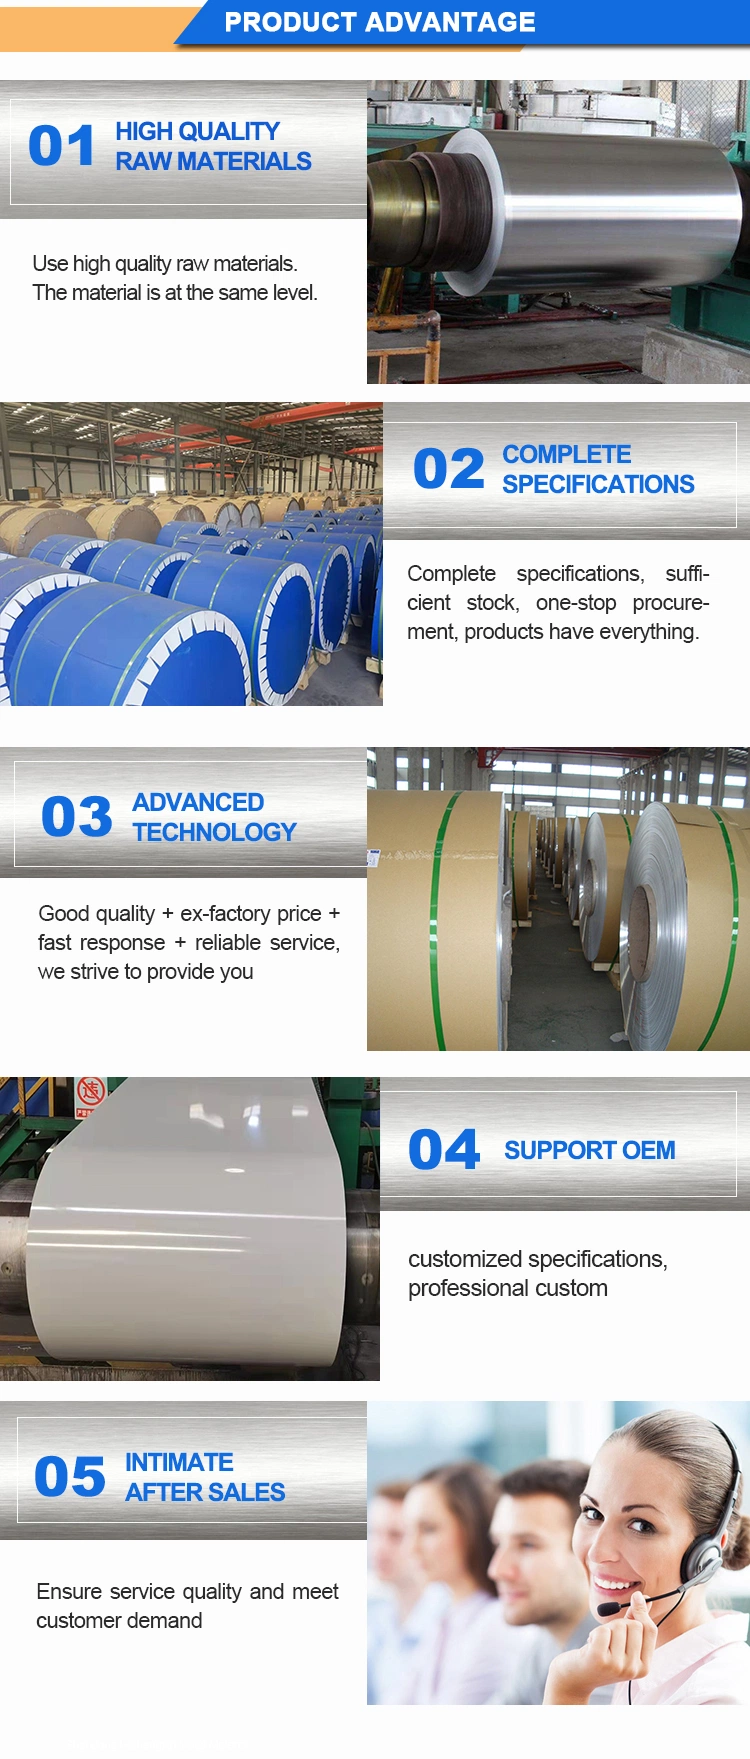 Hot Sale 1050 1060 1070 1100 1145 1199 1350 Cold/Hot Rolled Brushed/Polish/Mirror Surface Anodized Aluminum/Aluminium Coil